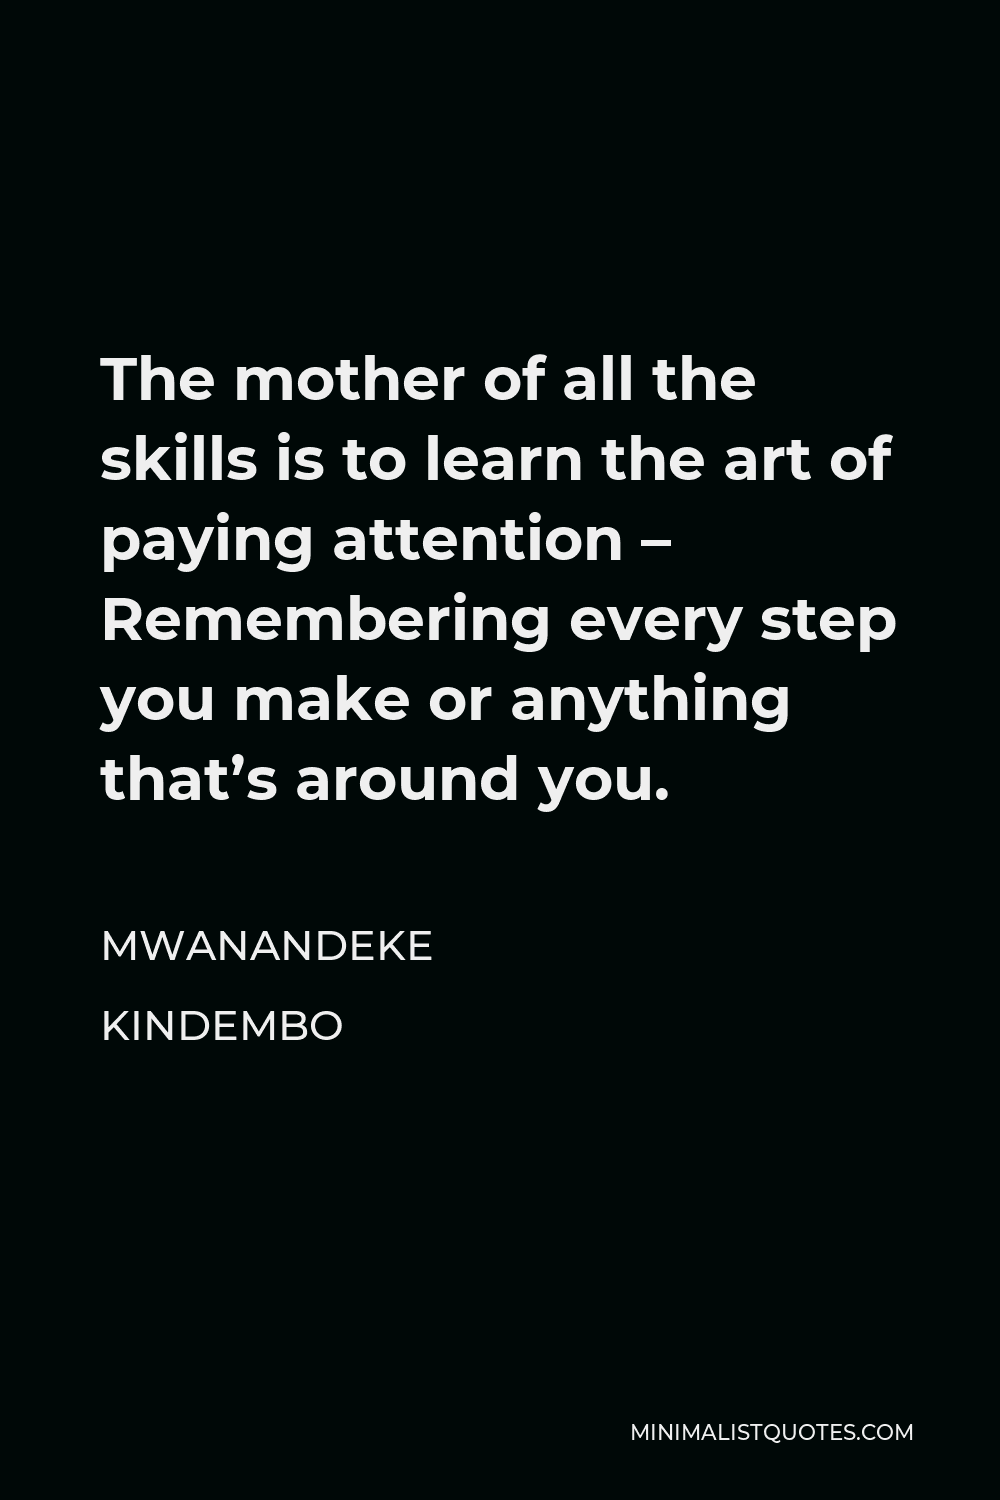 Mwanandeke Kindembo Quote - The mother of all the skills is to learn the art of paying attention – Remembering every step you make or anything that’s around you.